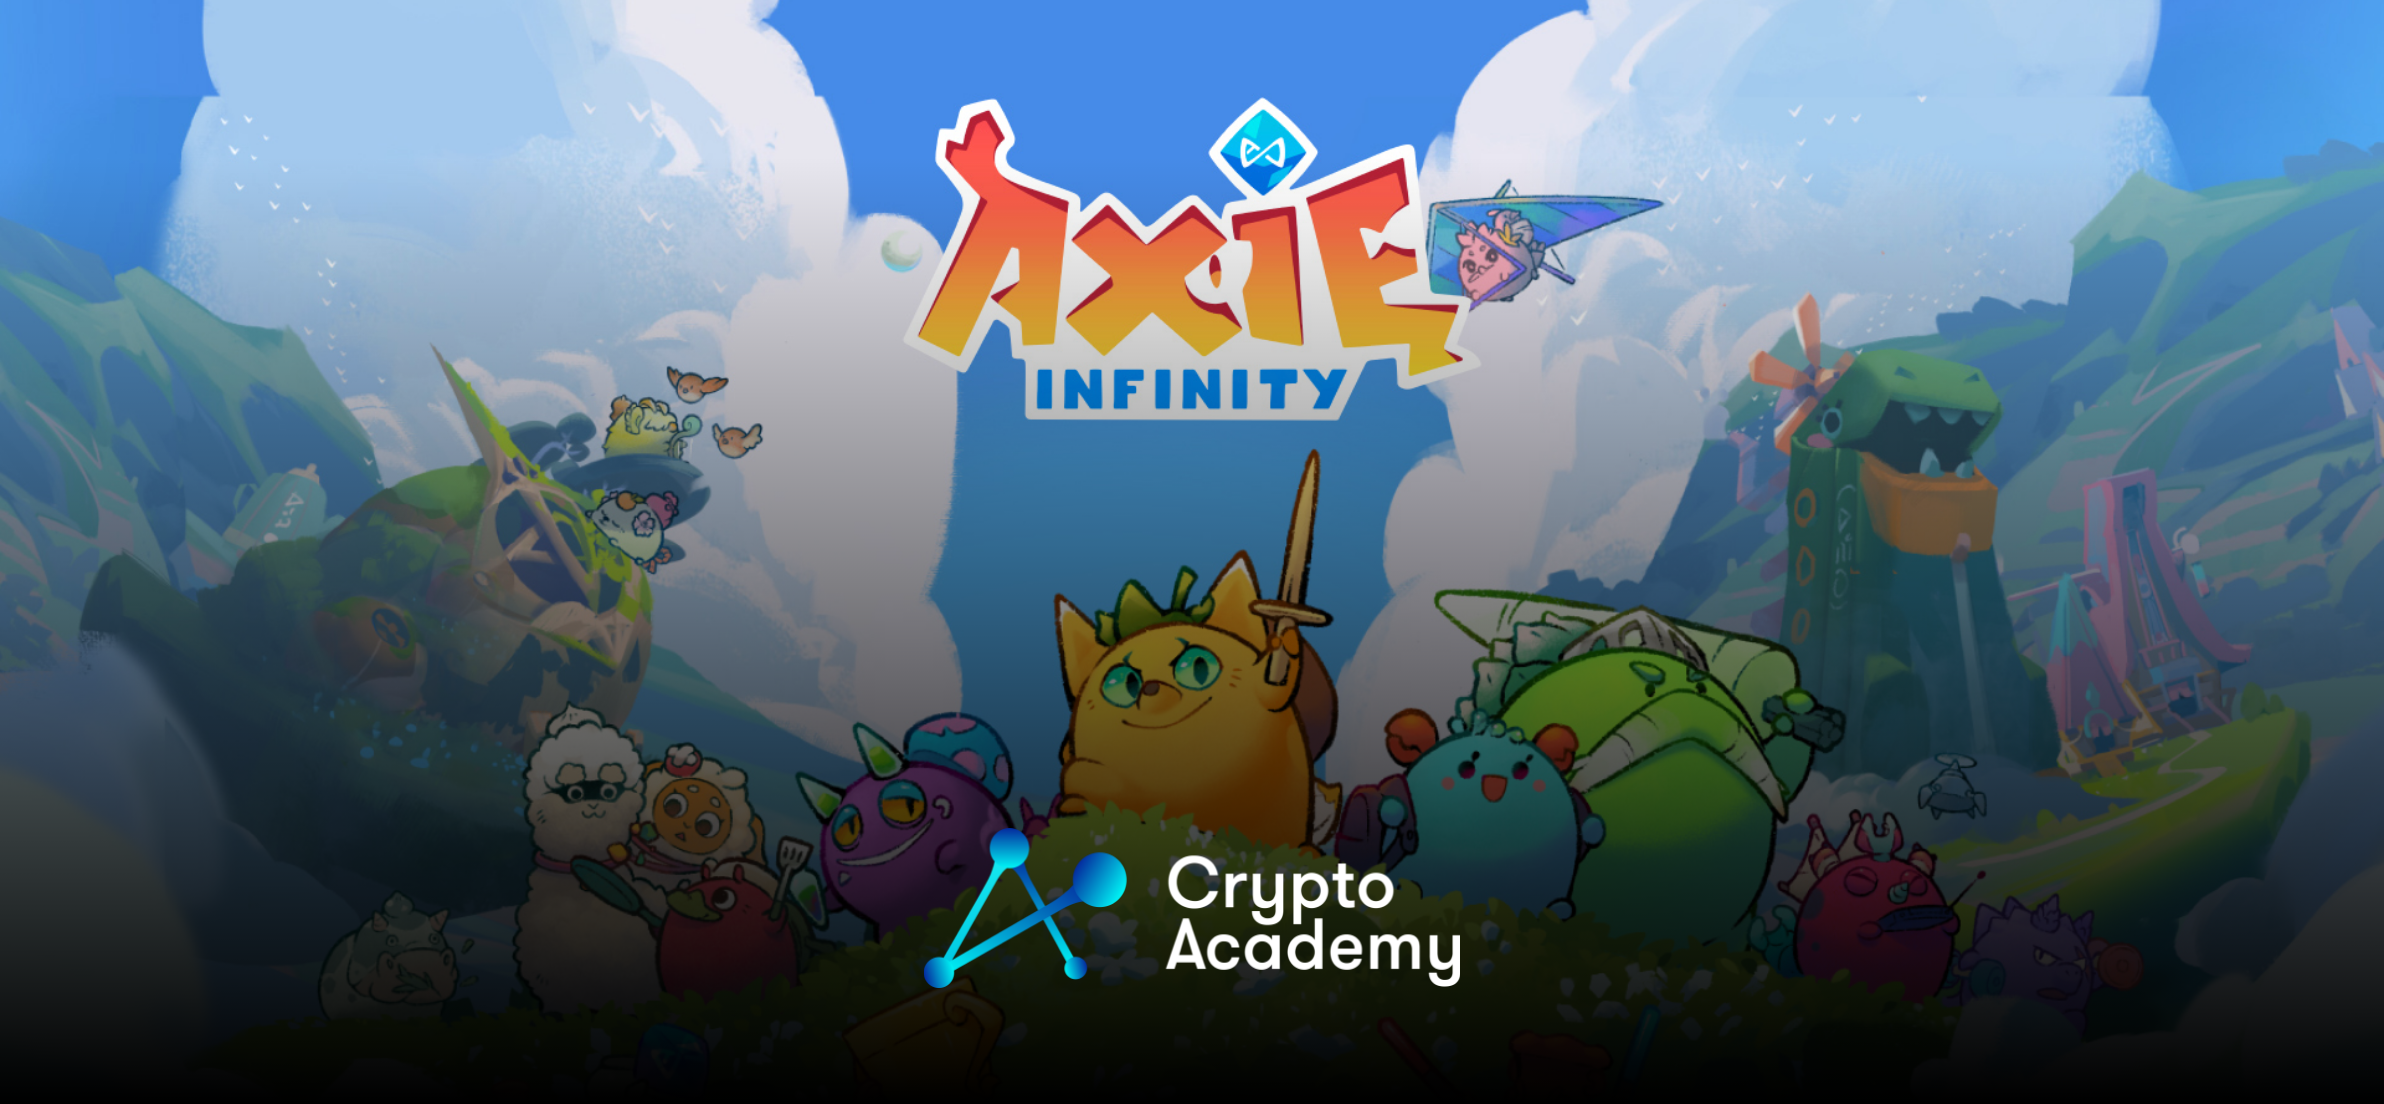 Developer of Axie Infinity Introduces Japanese Web2 Games to Ronin Network